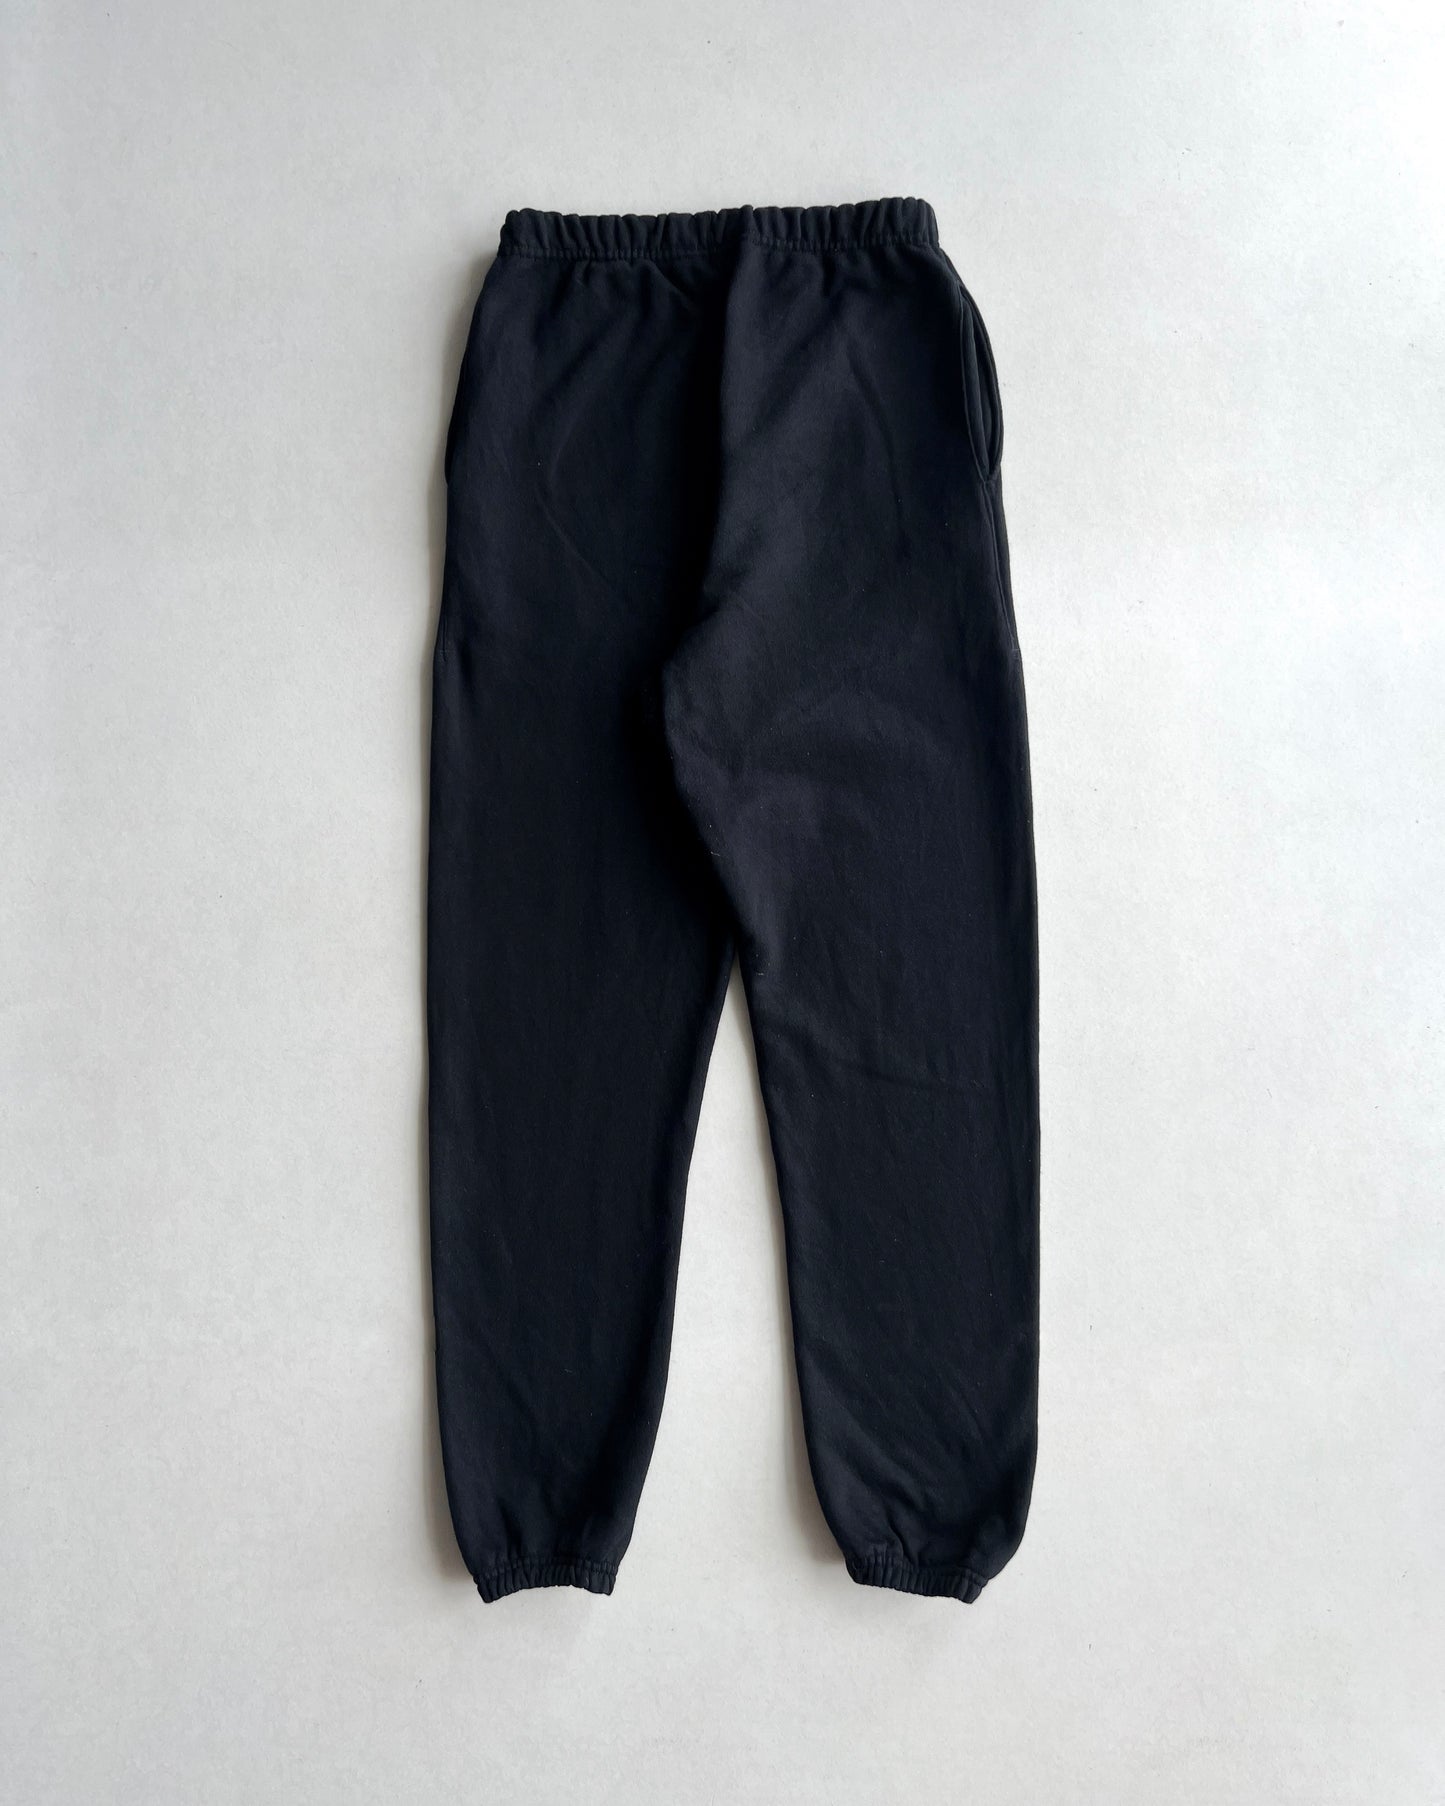 2000S CHAMPION 'STOP LOOKING AT MY DICK' SWEATPANTS (26-34